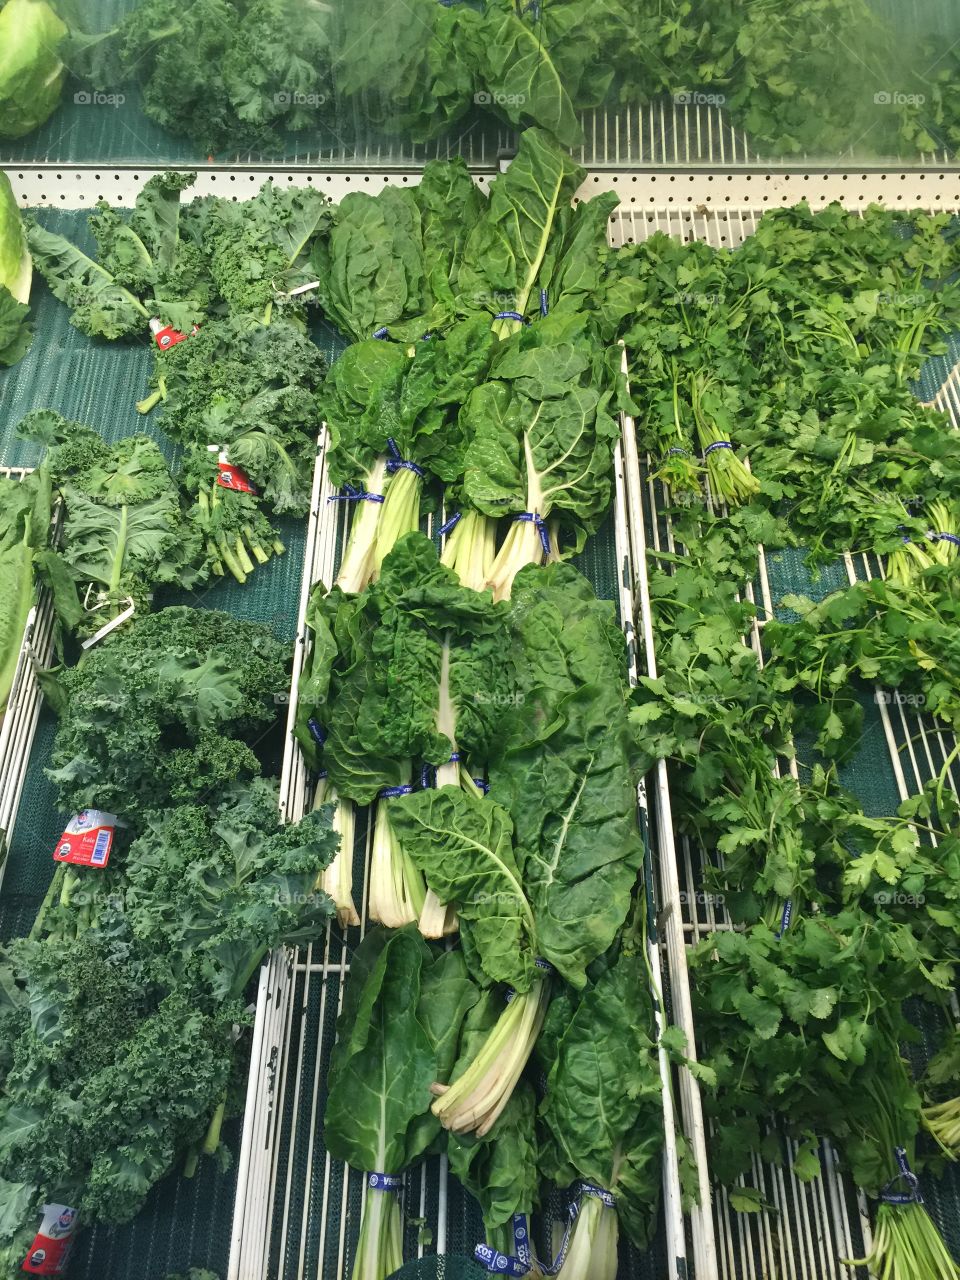 Greens in the supermarket